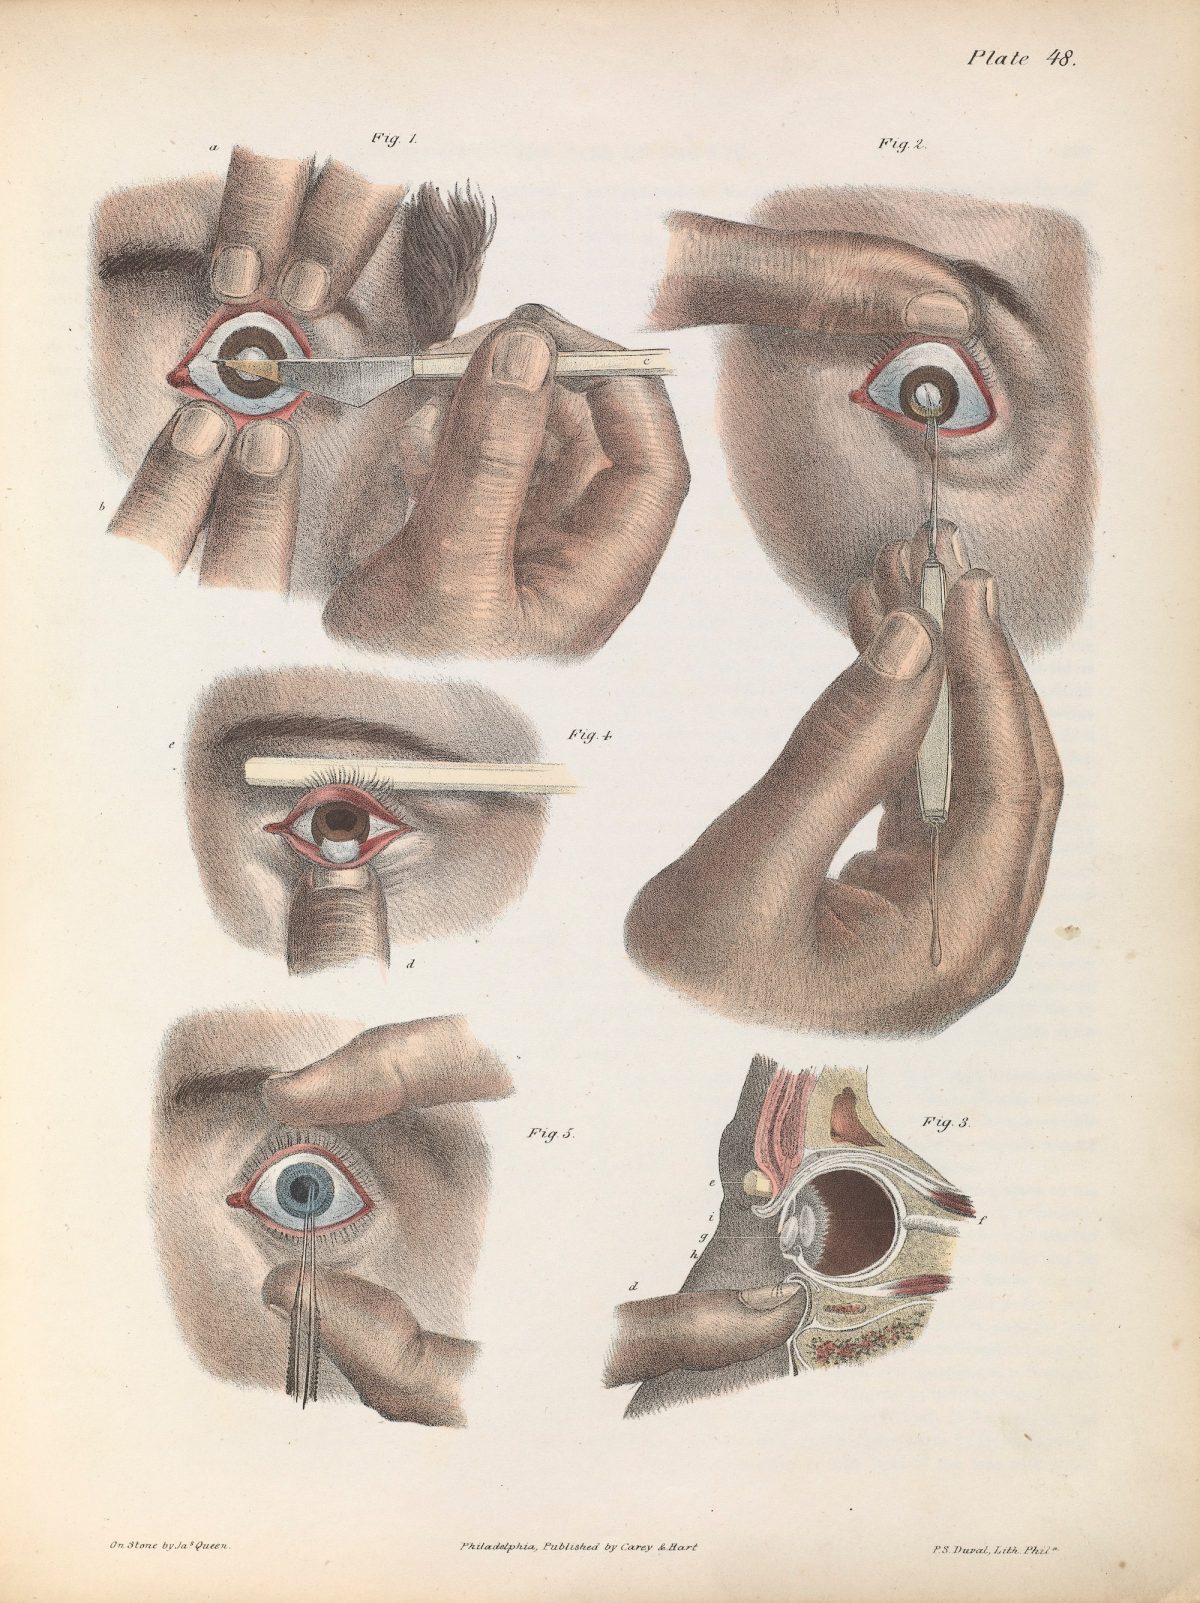 Plate XLVIII. Illustration of surgery on the eye for the removal of a cataract. Operation by extraction - inferior section of the cornea.